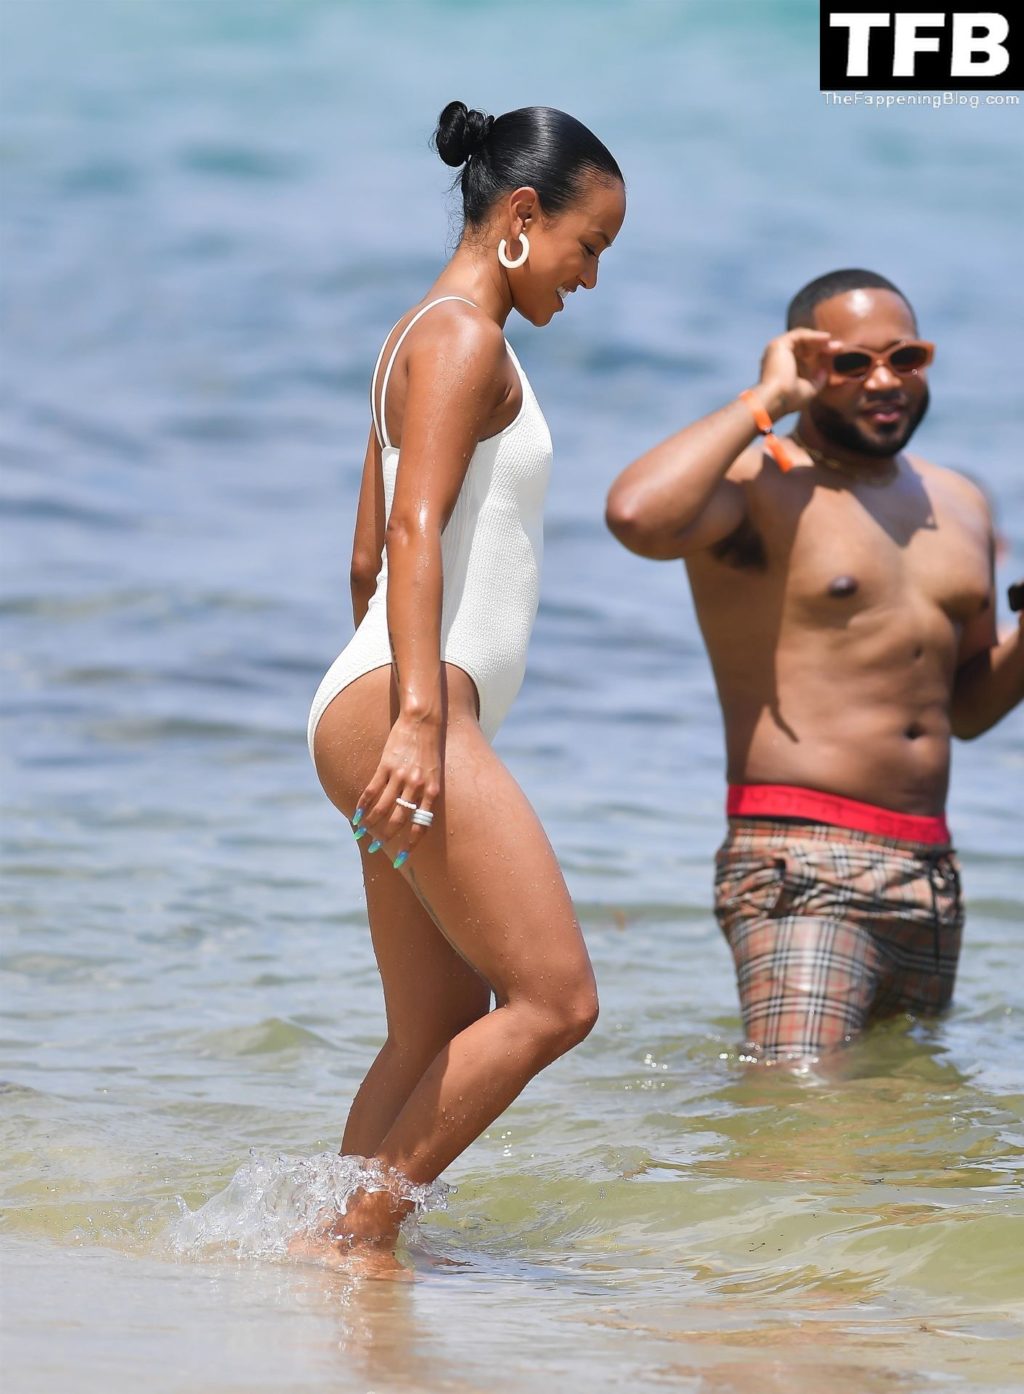 Karrueche Tran Sexy The Fappening Blog 18 1024x1394 - Karrueche Tran Looks Incredible in a White Swimsuit on the Beach in Miami (45 Photos)